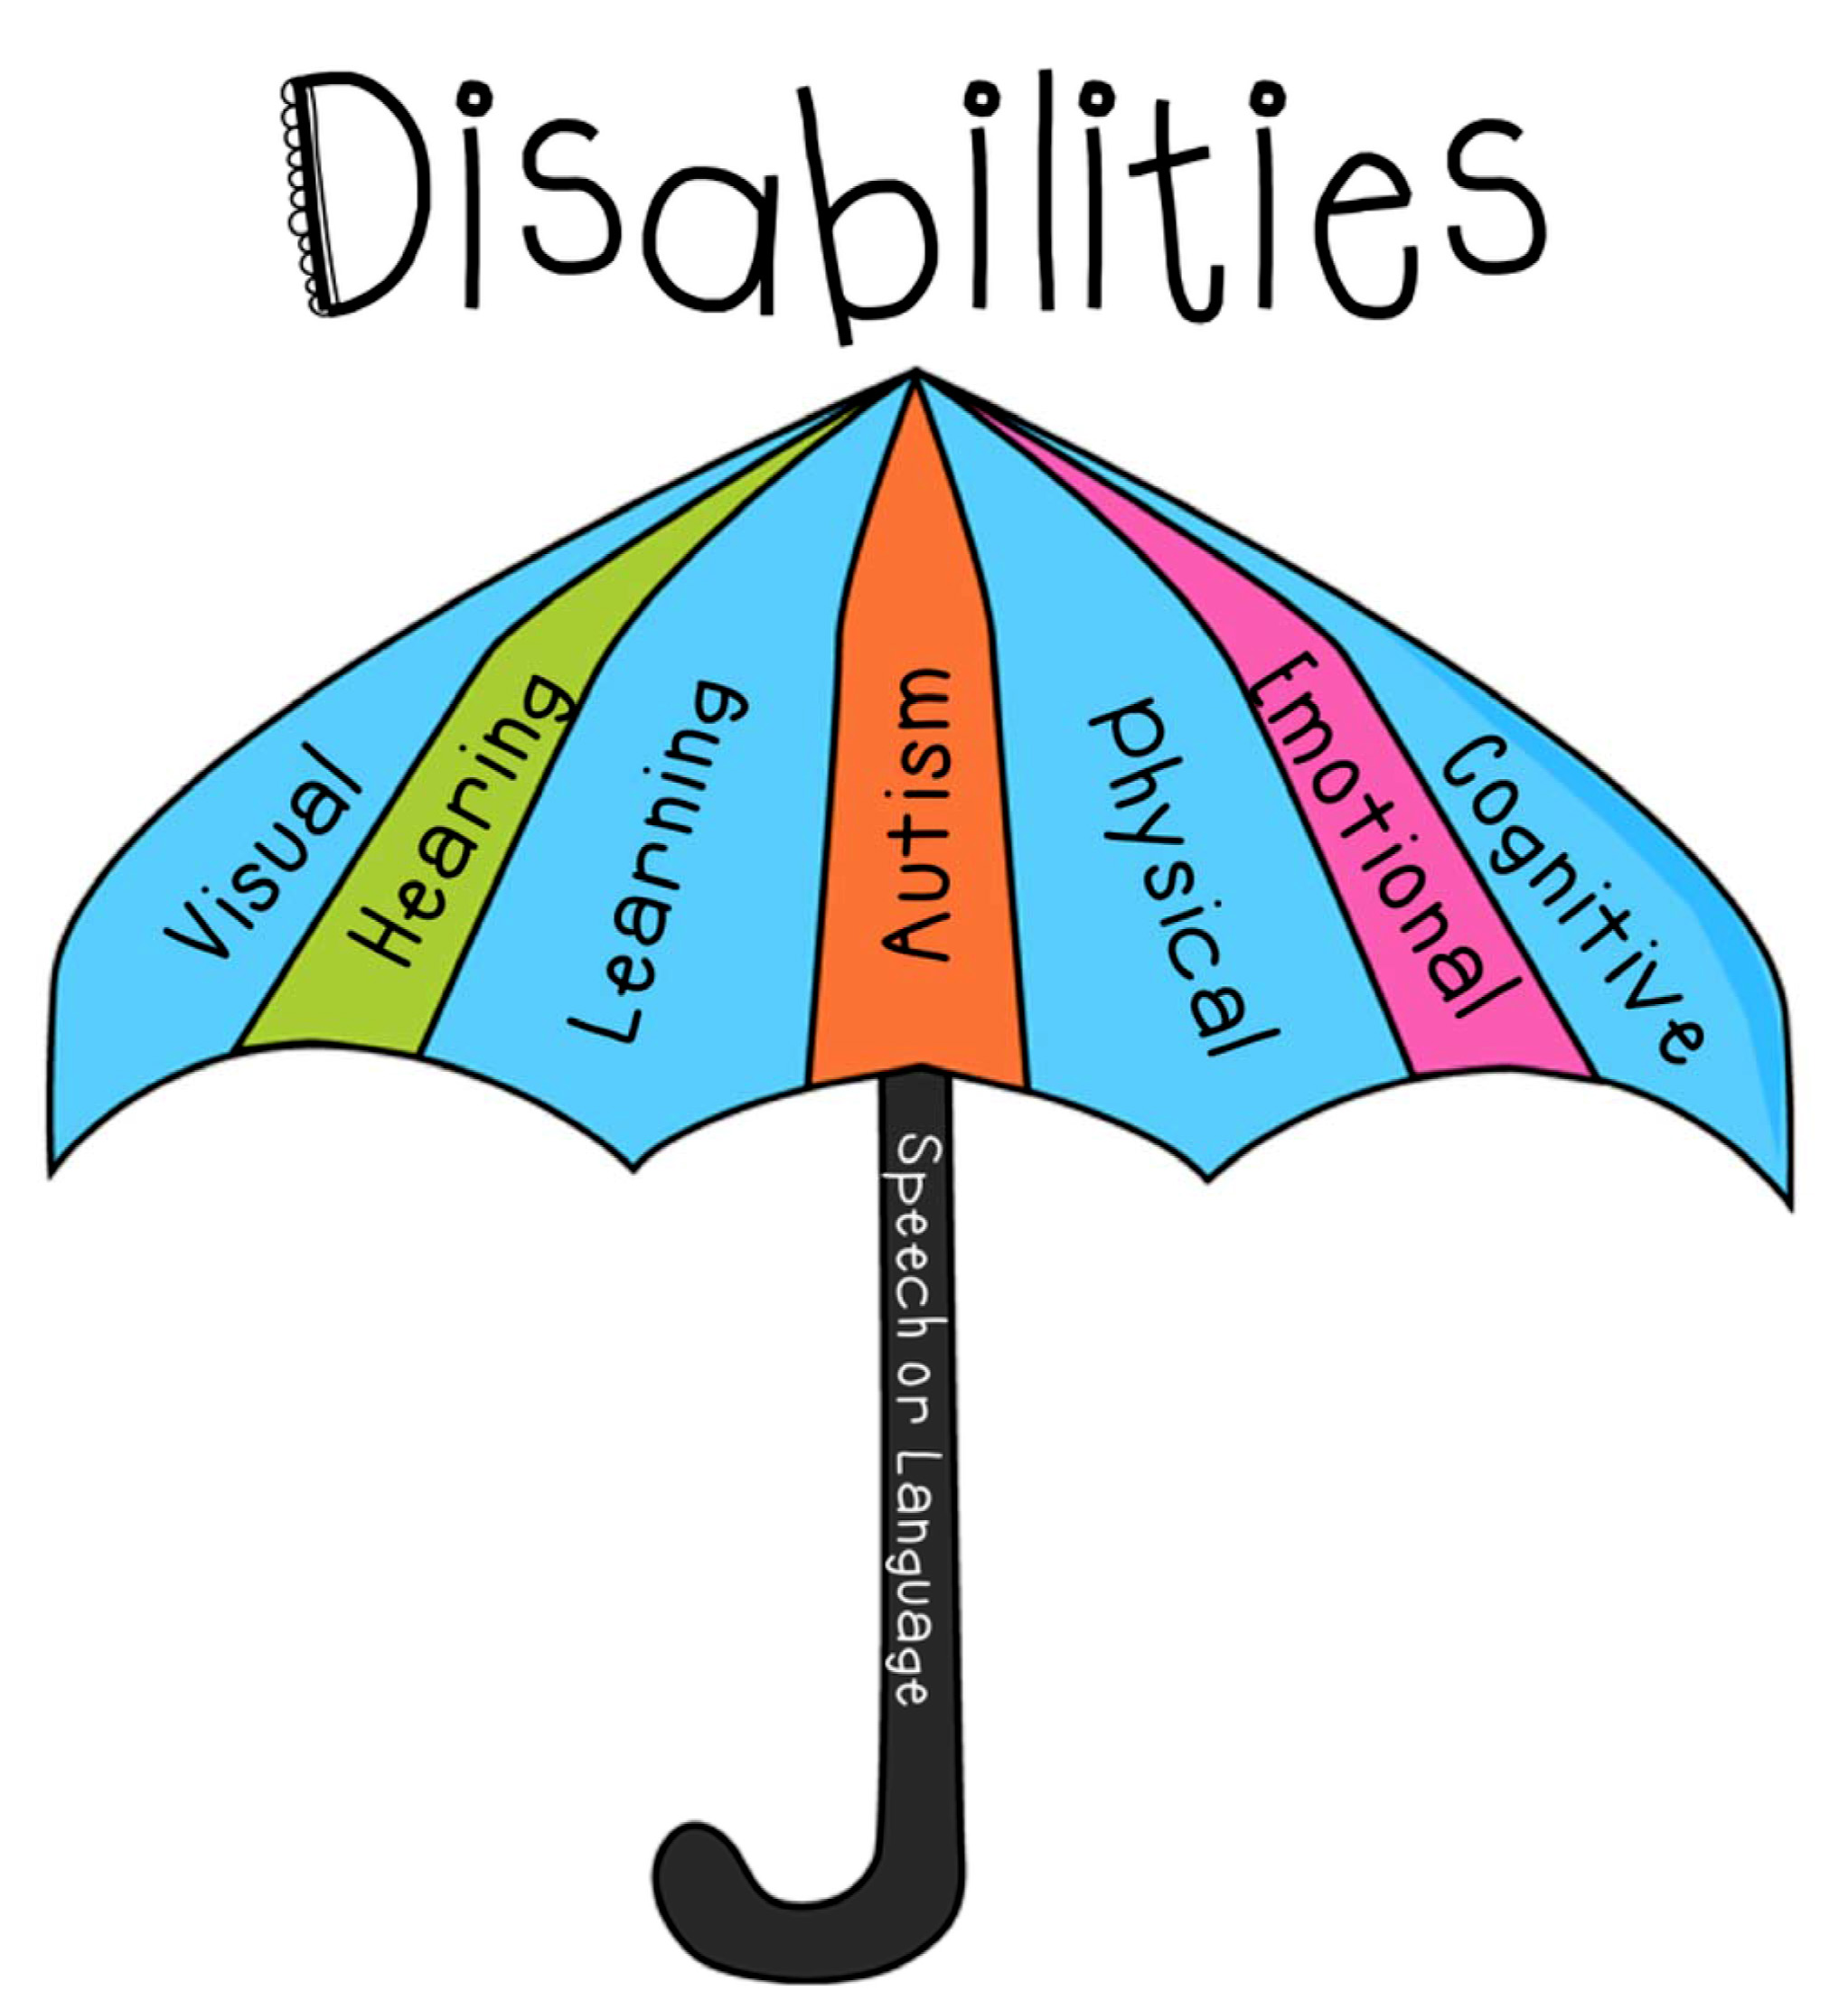 umbrellas with types of disabilities listed on panels and handle